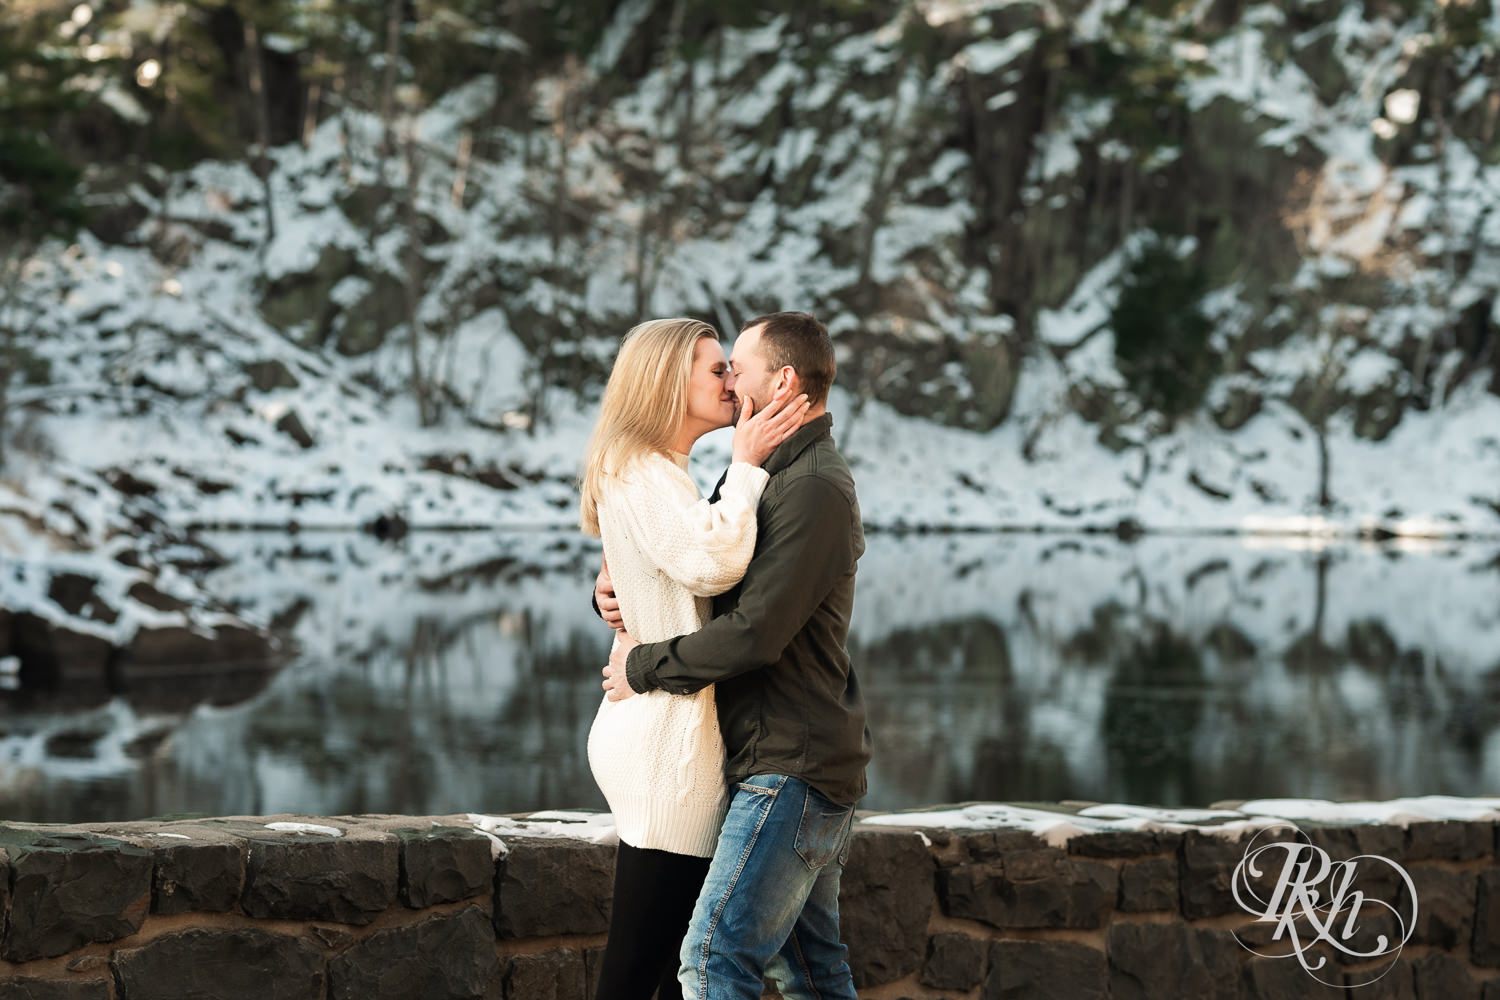 Man in jeans and green shirt and woman in a white sweater kiss in front of the river during Taylor's Falls engagement photography session.